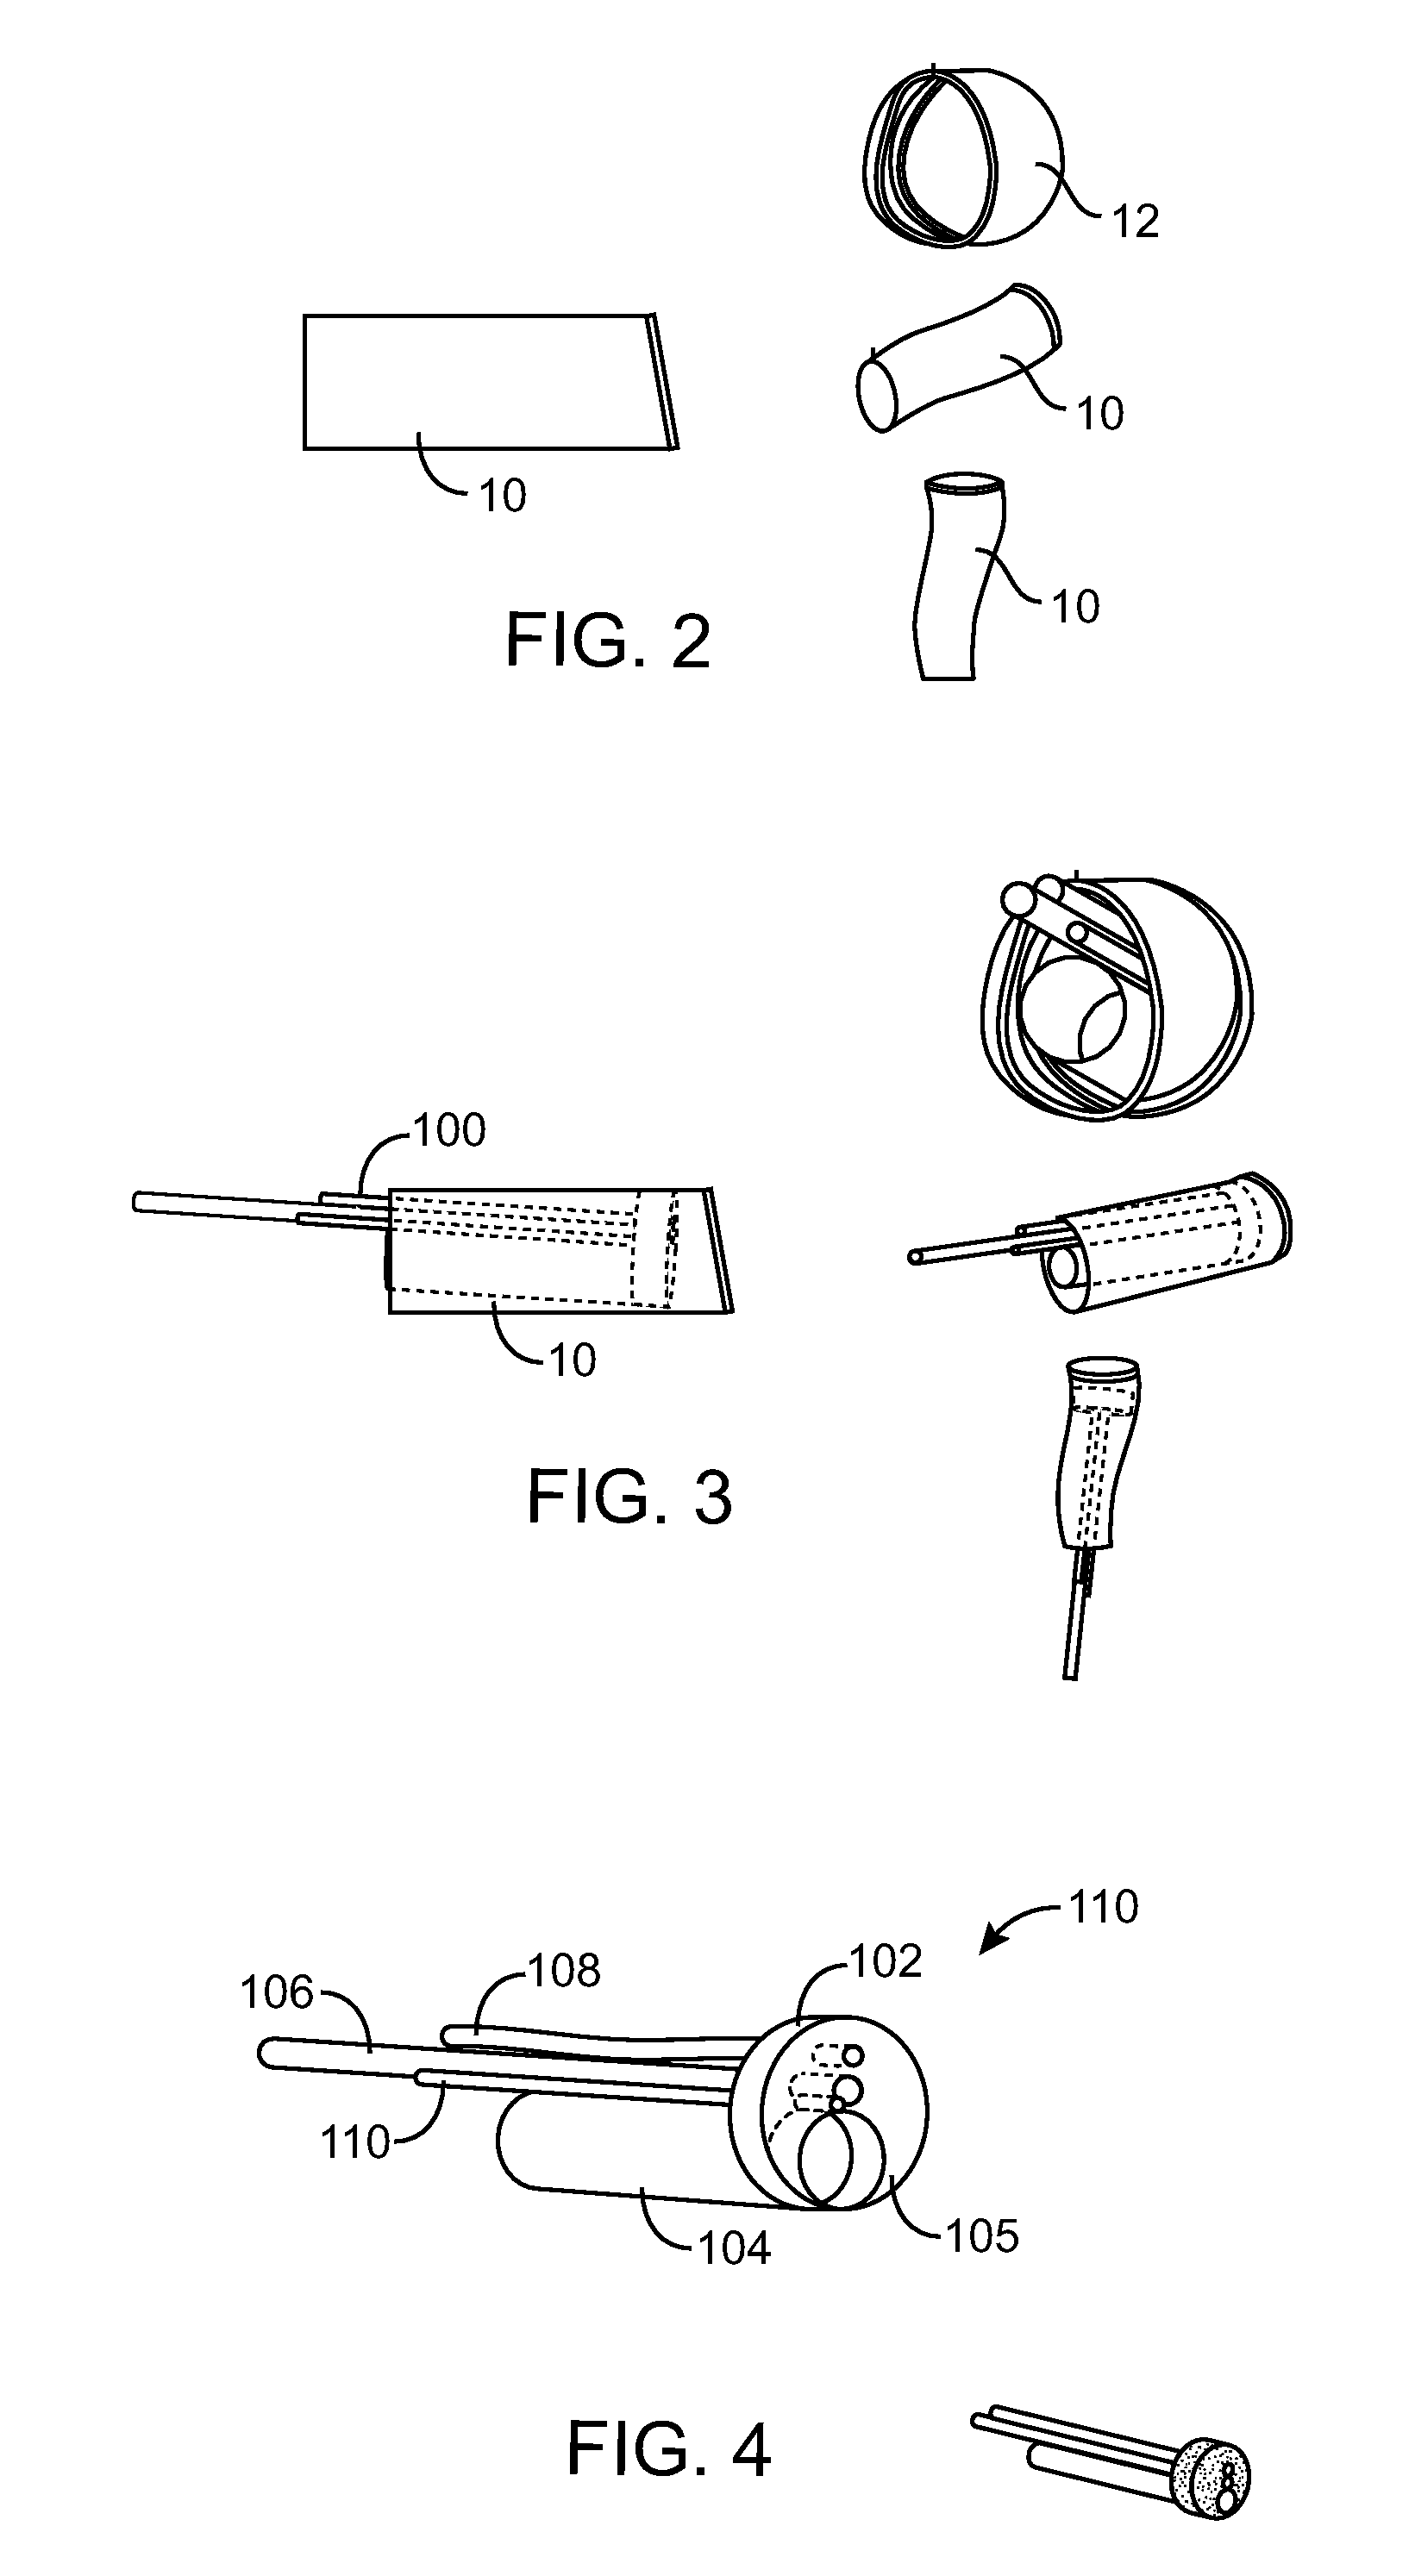 System and Method for the Simultaneous Bilateral Integrated Tympanic Drug Delivery and Guided Treatment of Target Tissues Within the Ears